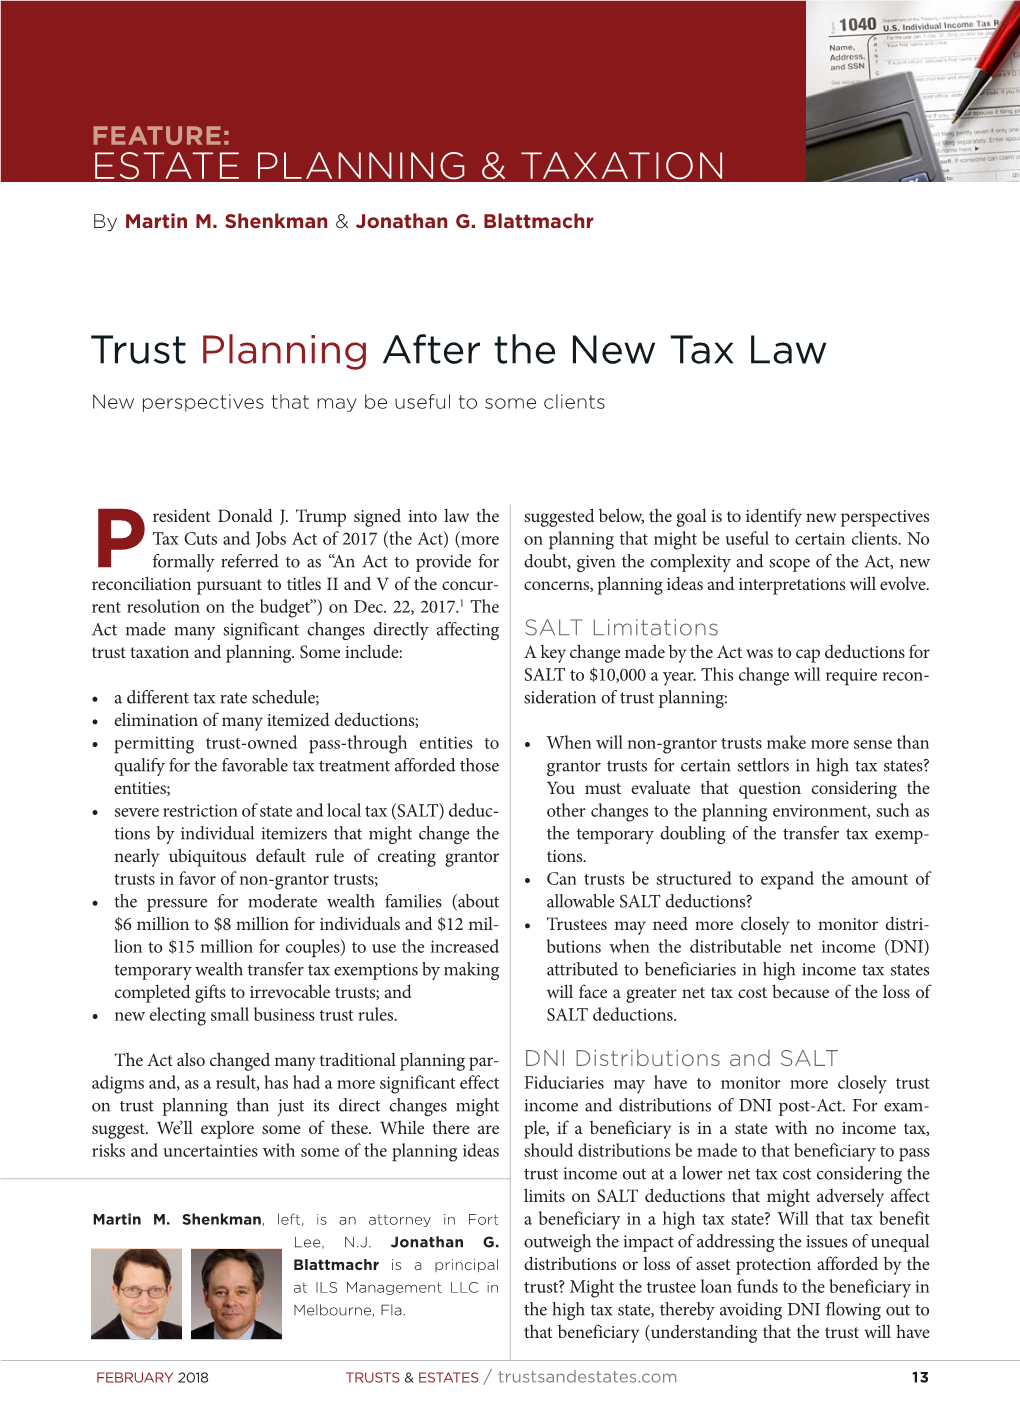 Trust Planning After the New Tax Law